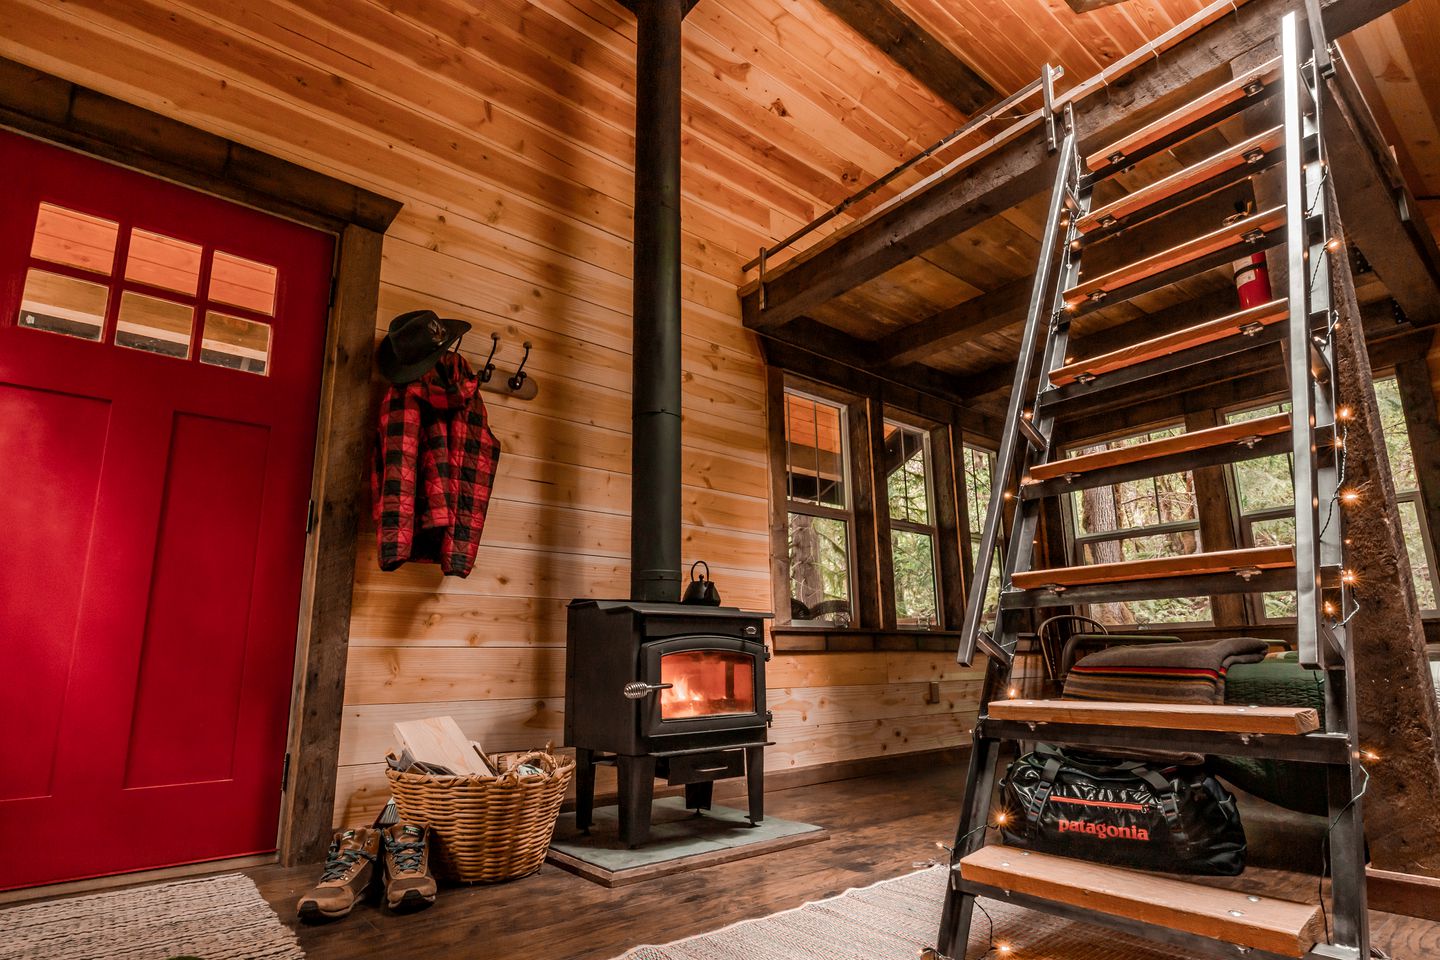 The cabin interior with the woodstove and ladder to the loft bed